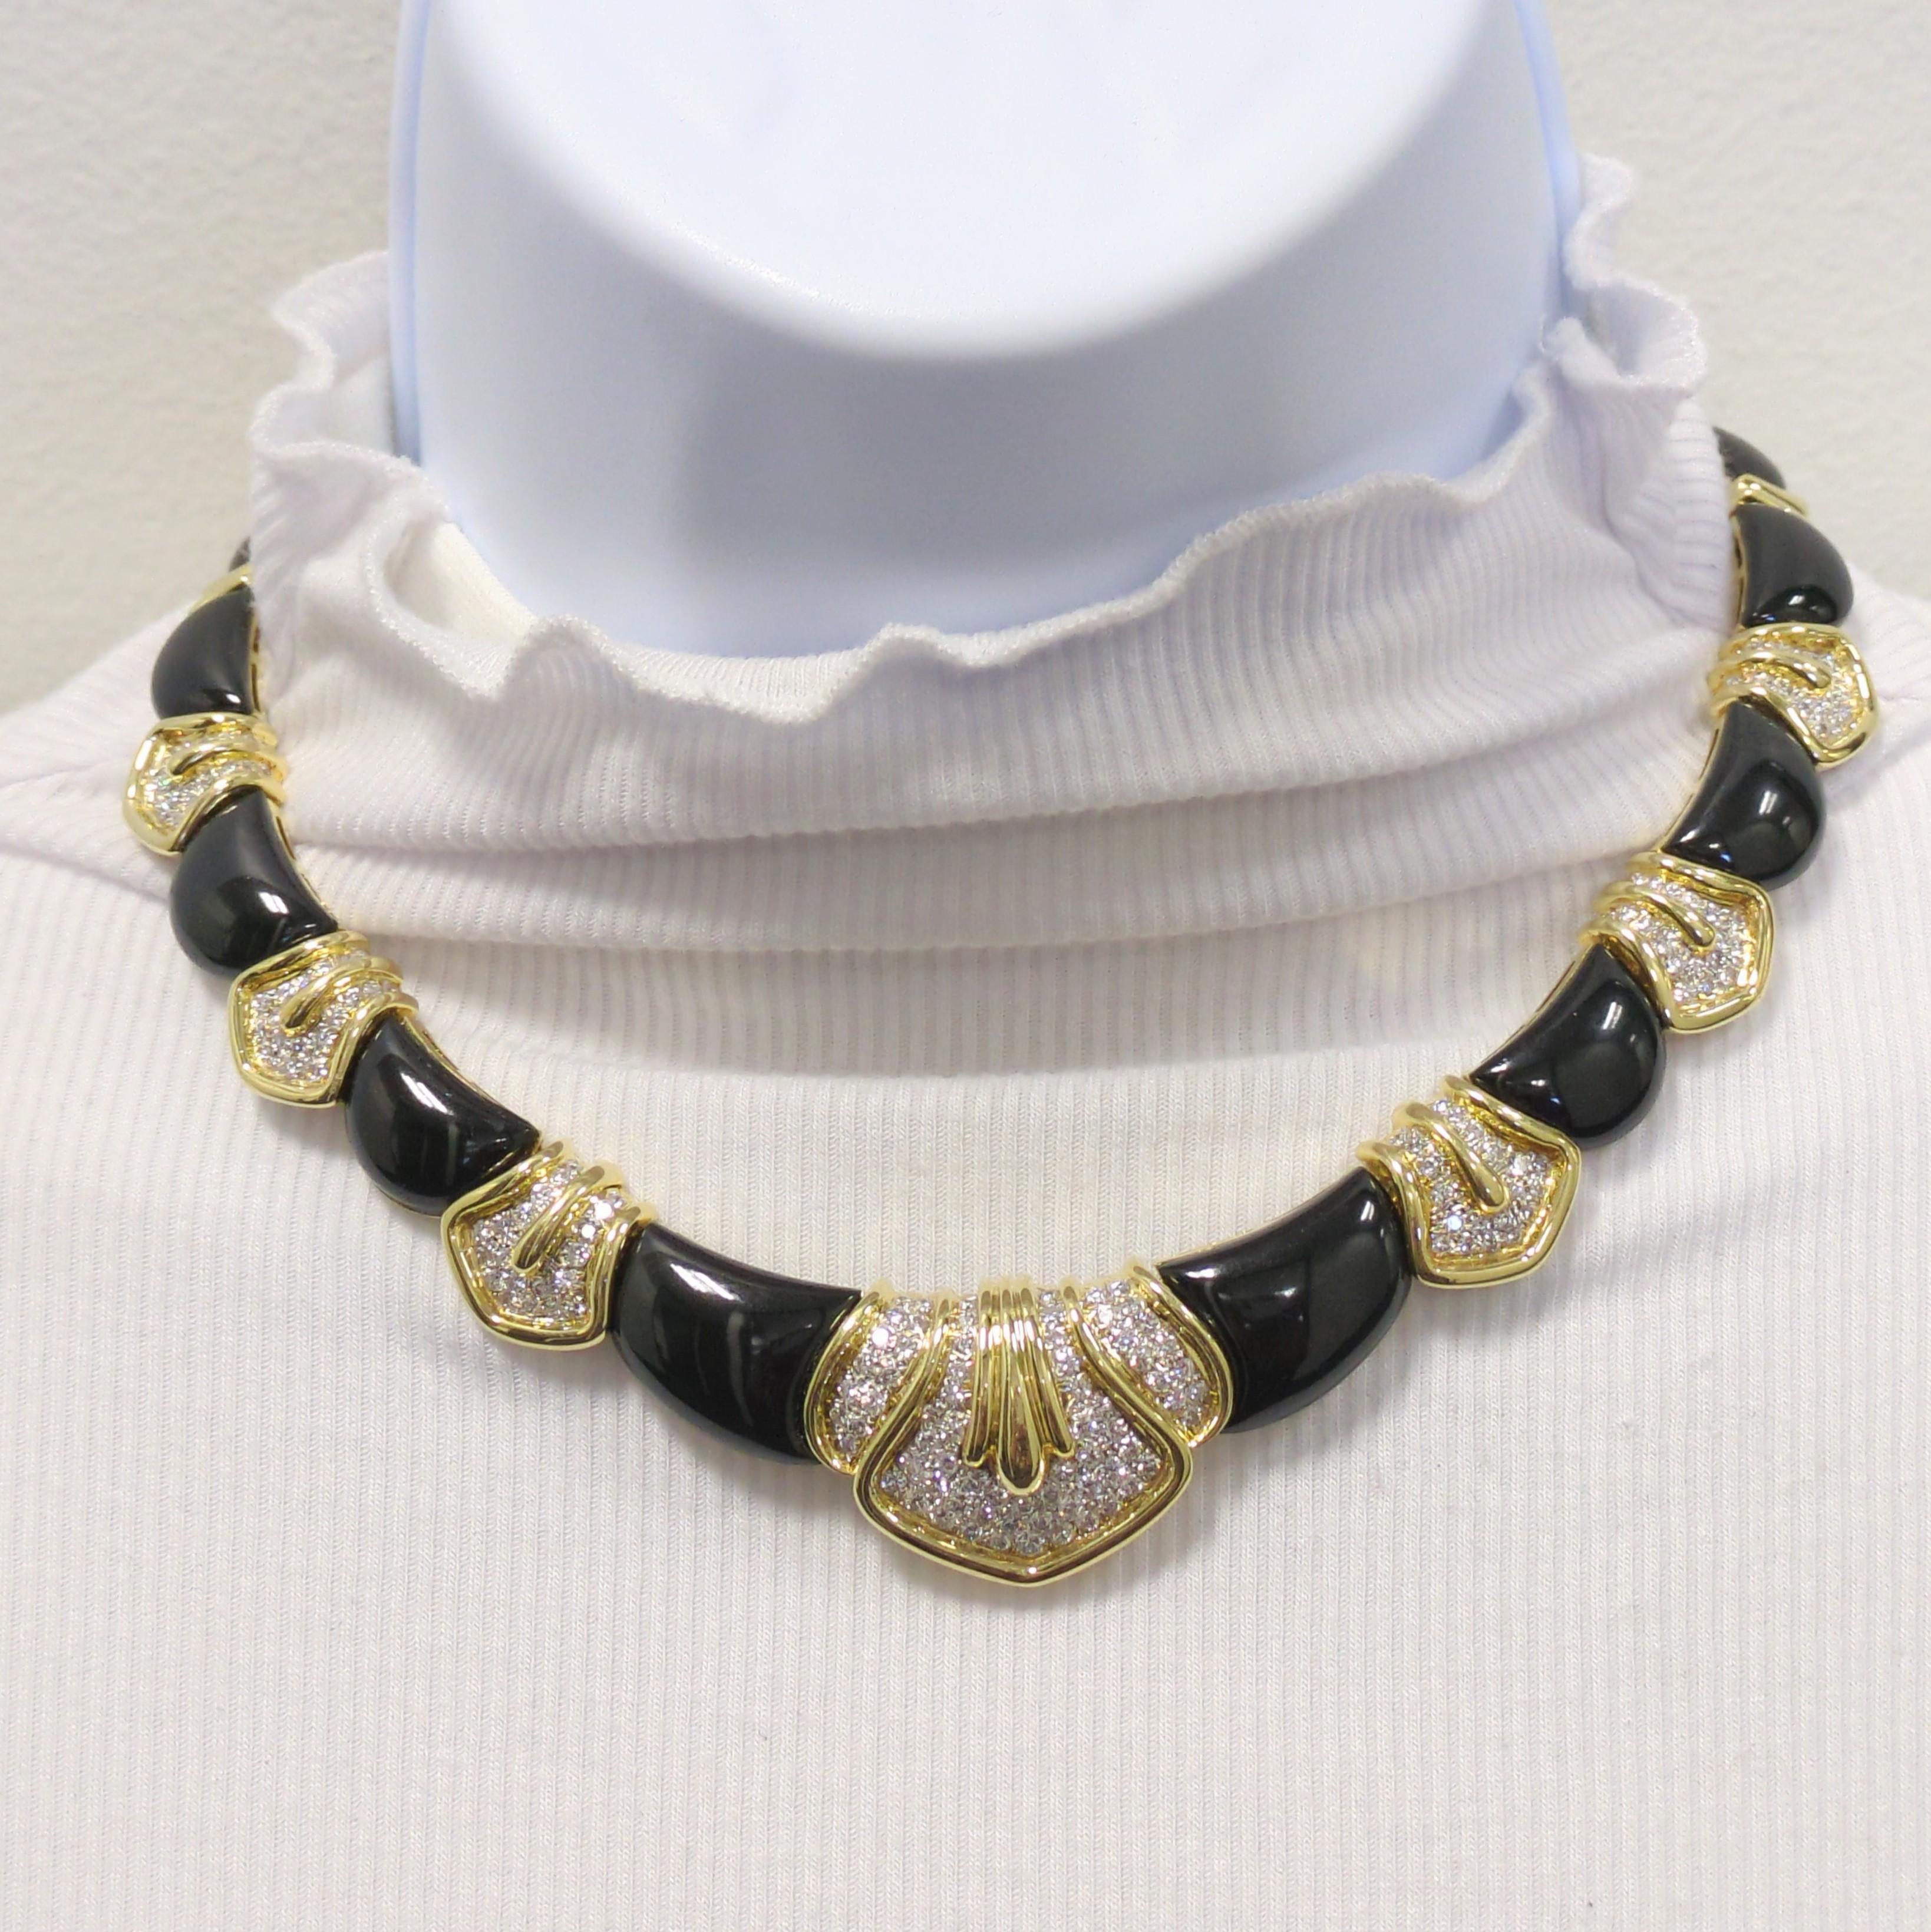 Beautiful estate necklace showcasing onyx and 4.50 cts. of good quality white diamond rounds in a handmade 18k yellow gold mounting.  This necklace has a stunning presence and a big look.  Approximately 13